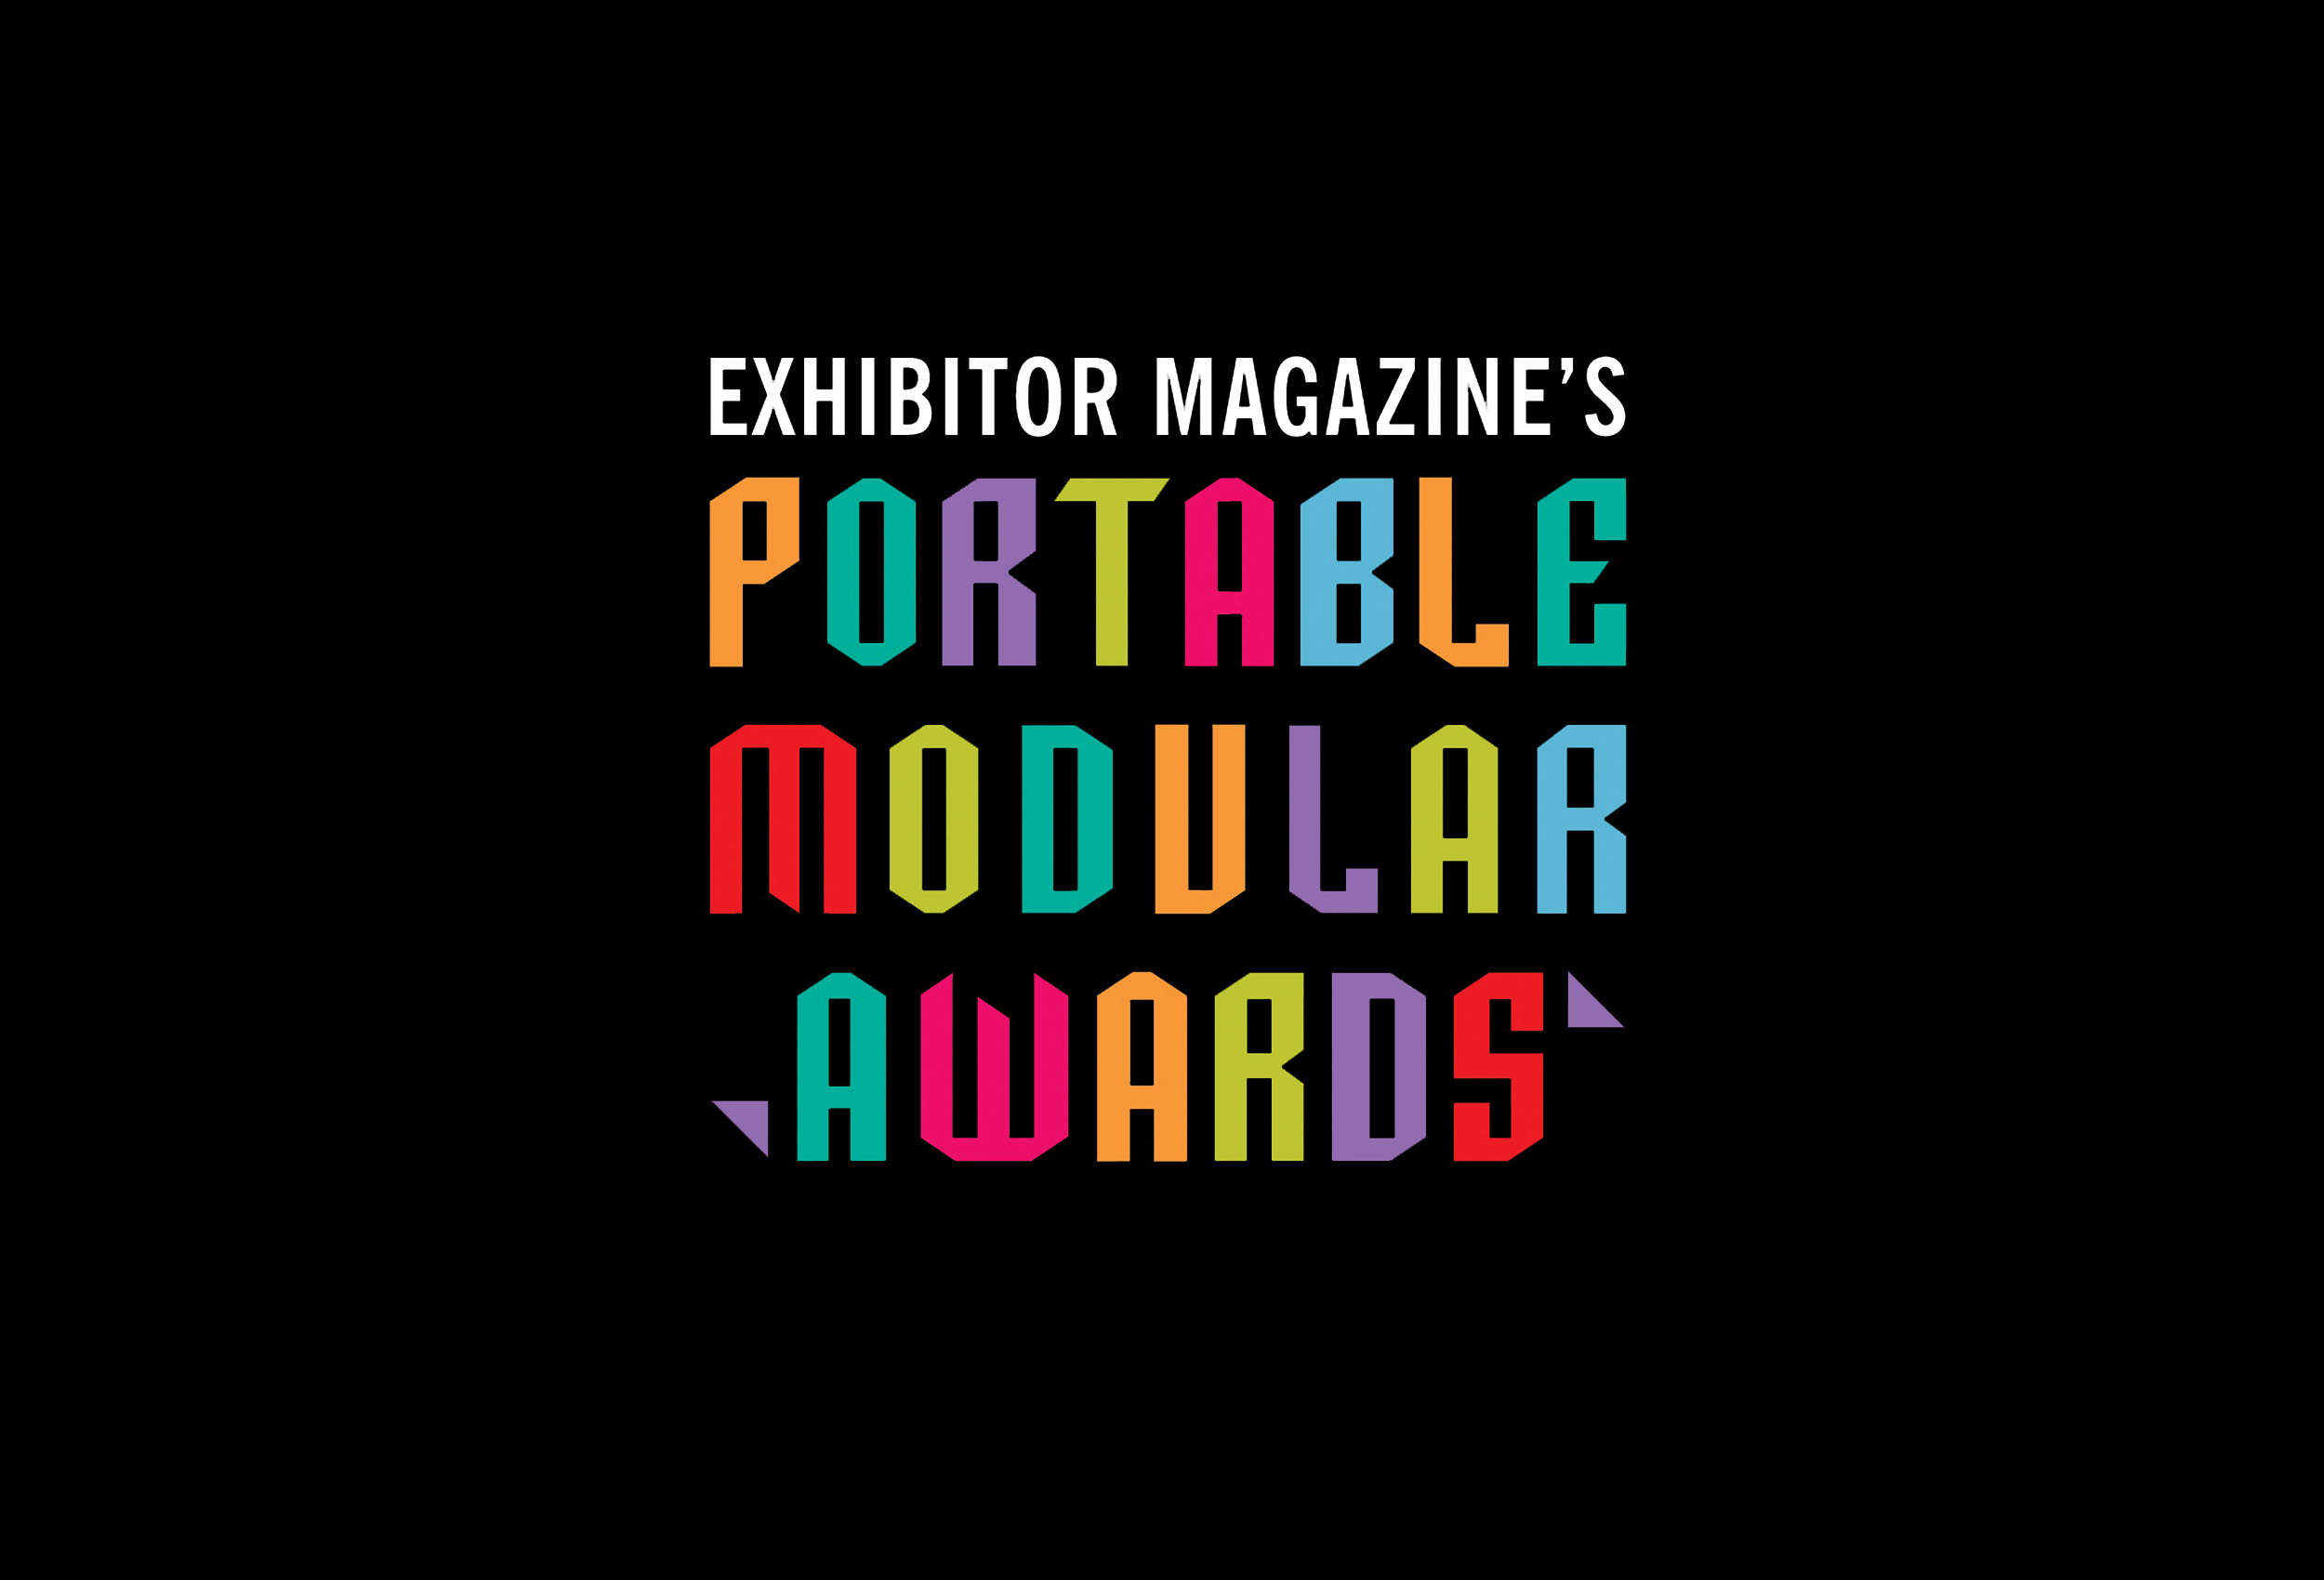 2020 Exhibits Wins Best Technology Award for Second Year in a Row in the Portable Modular Awards_2500x1700